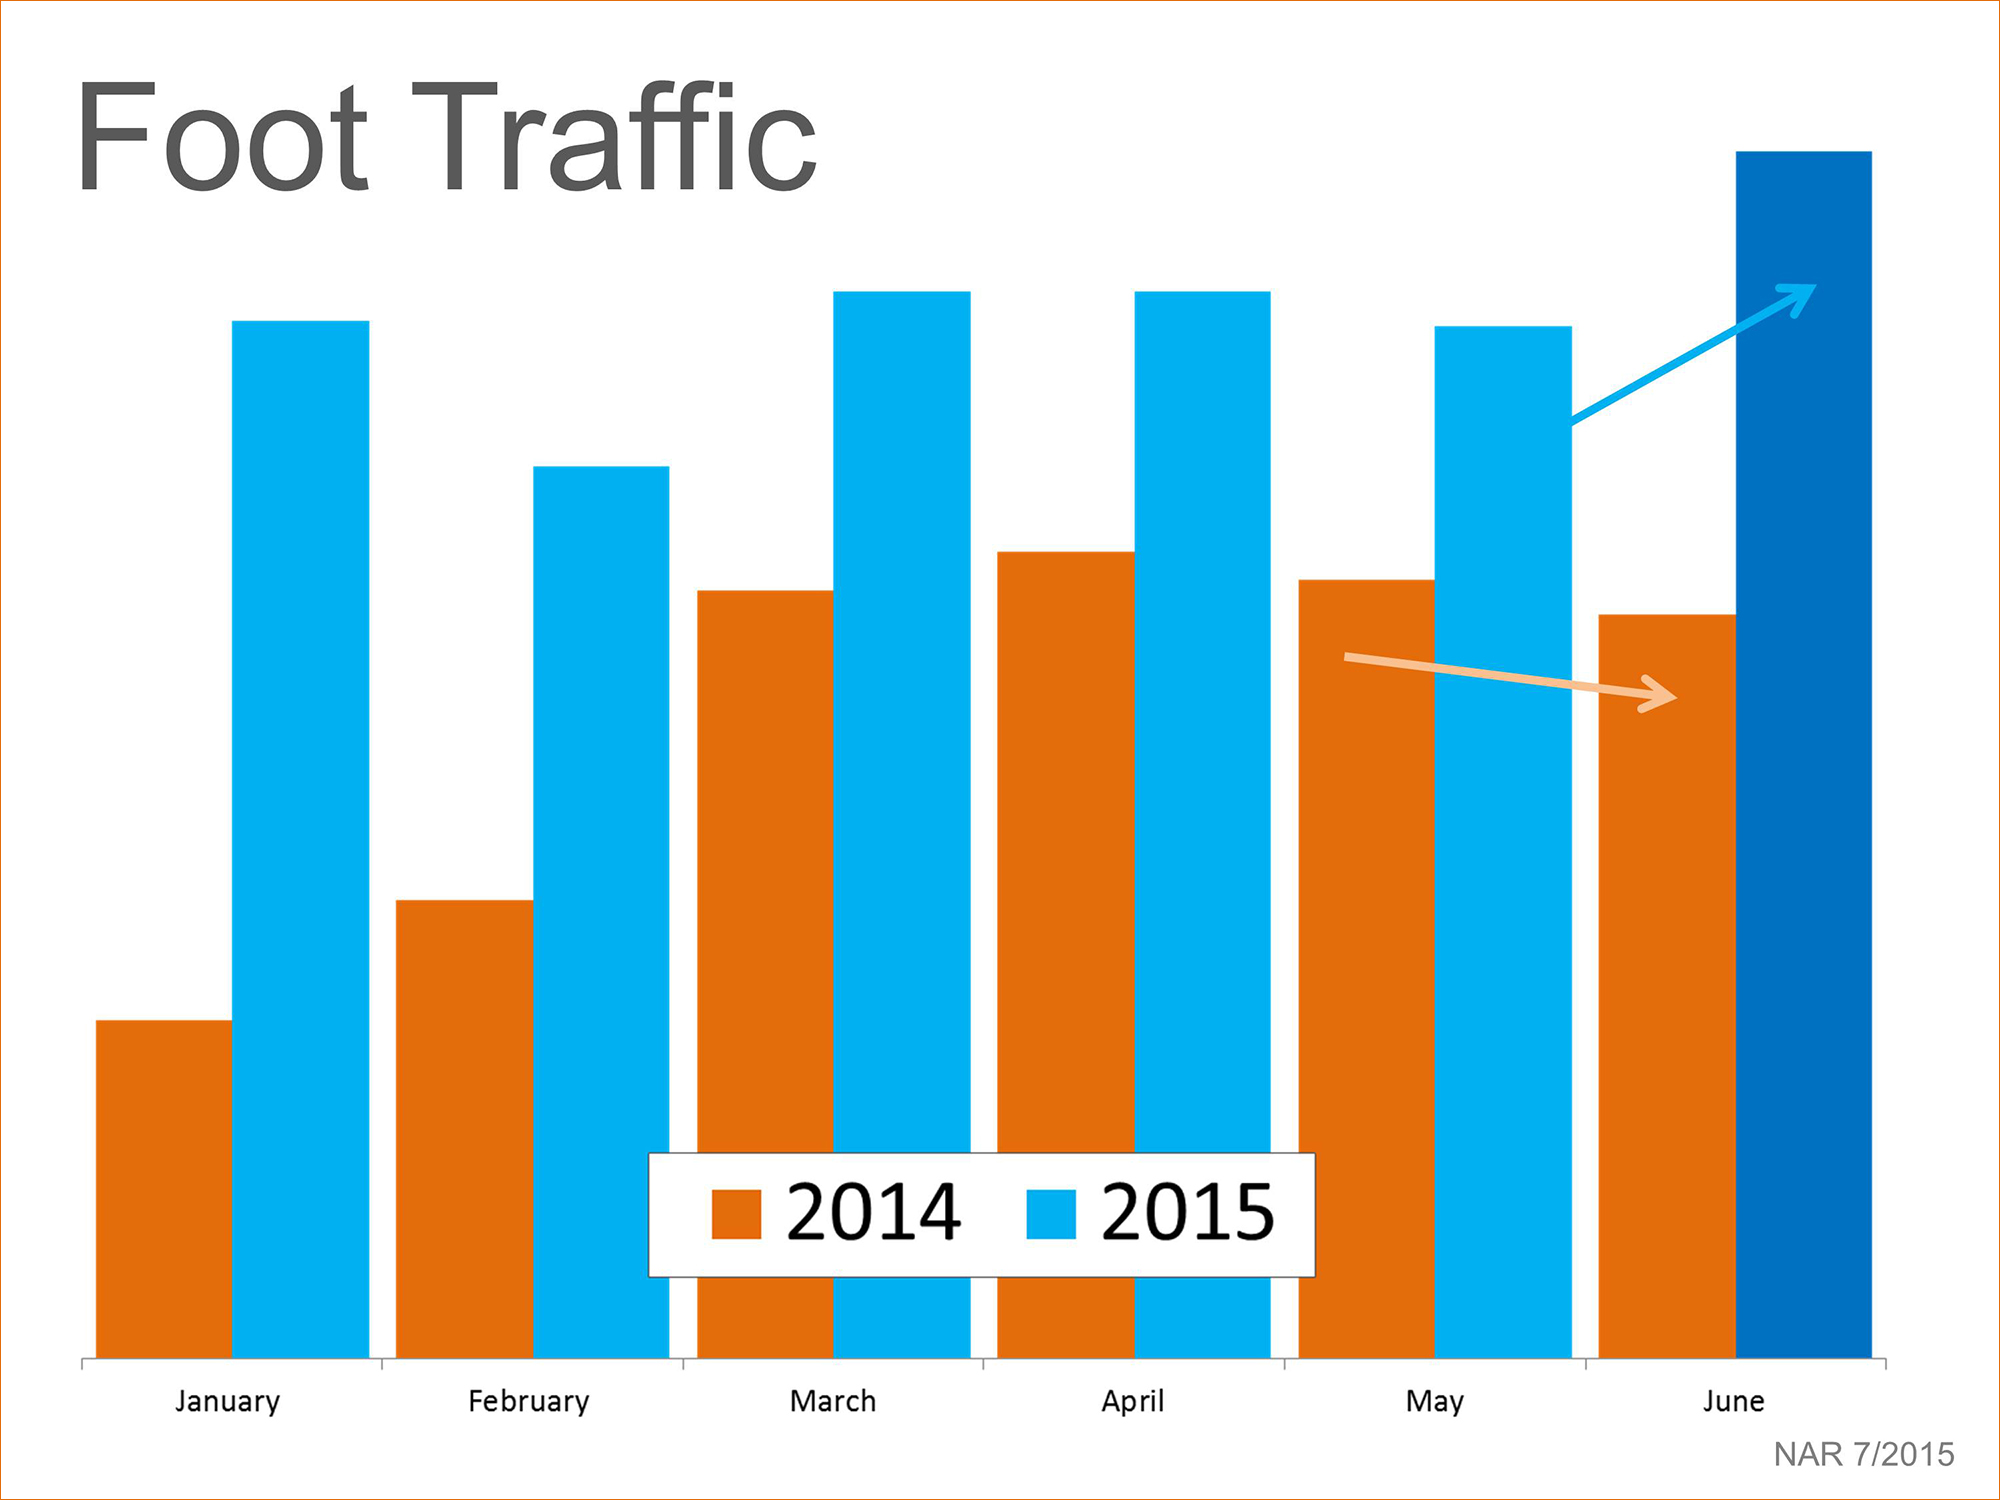 Foot Traffic Comparison | Simplifying The Market